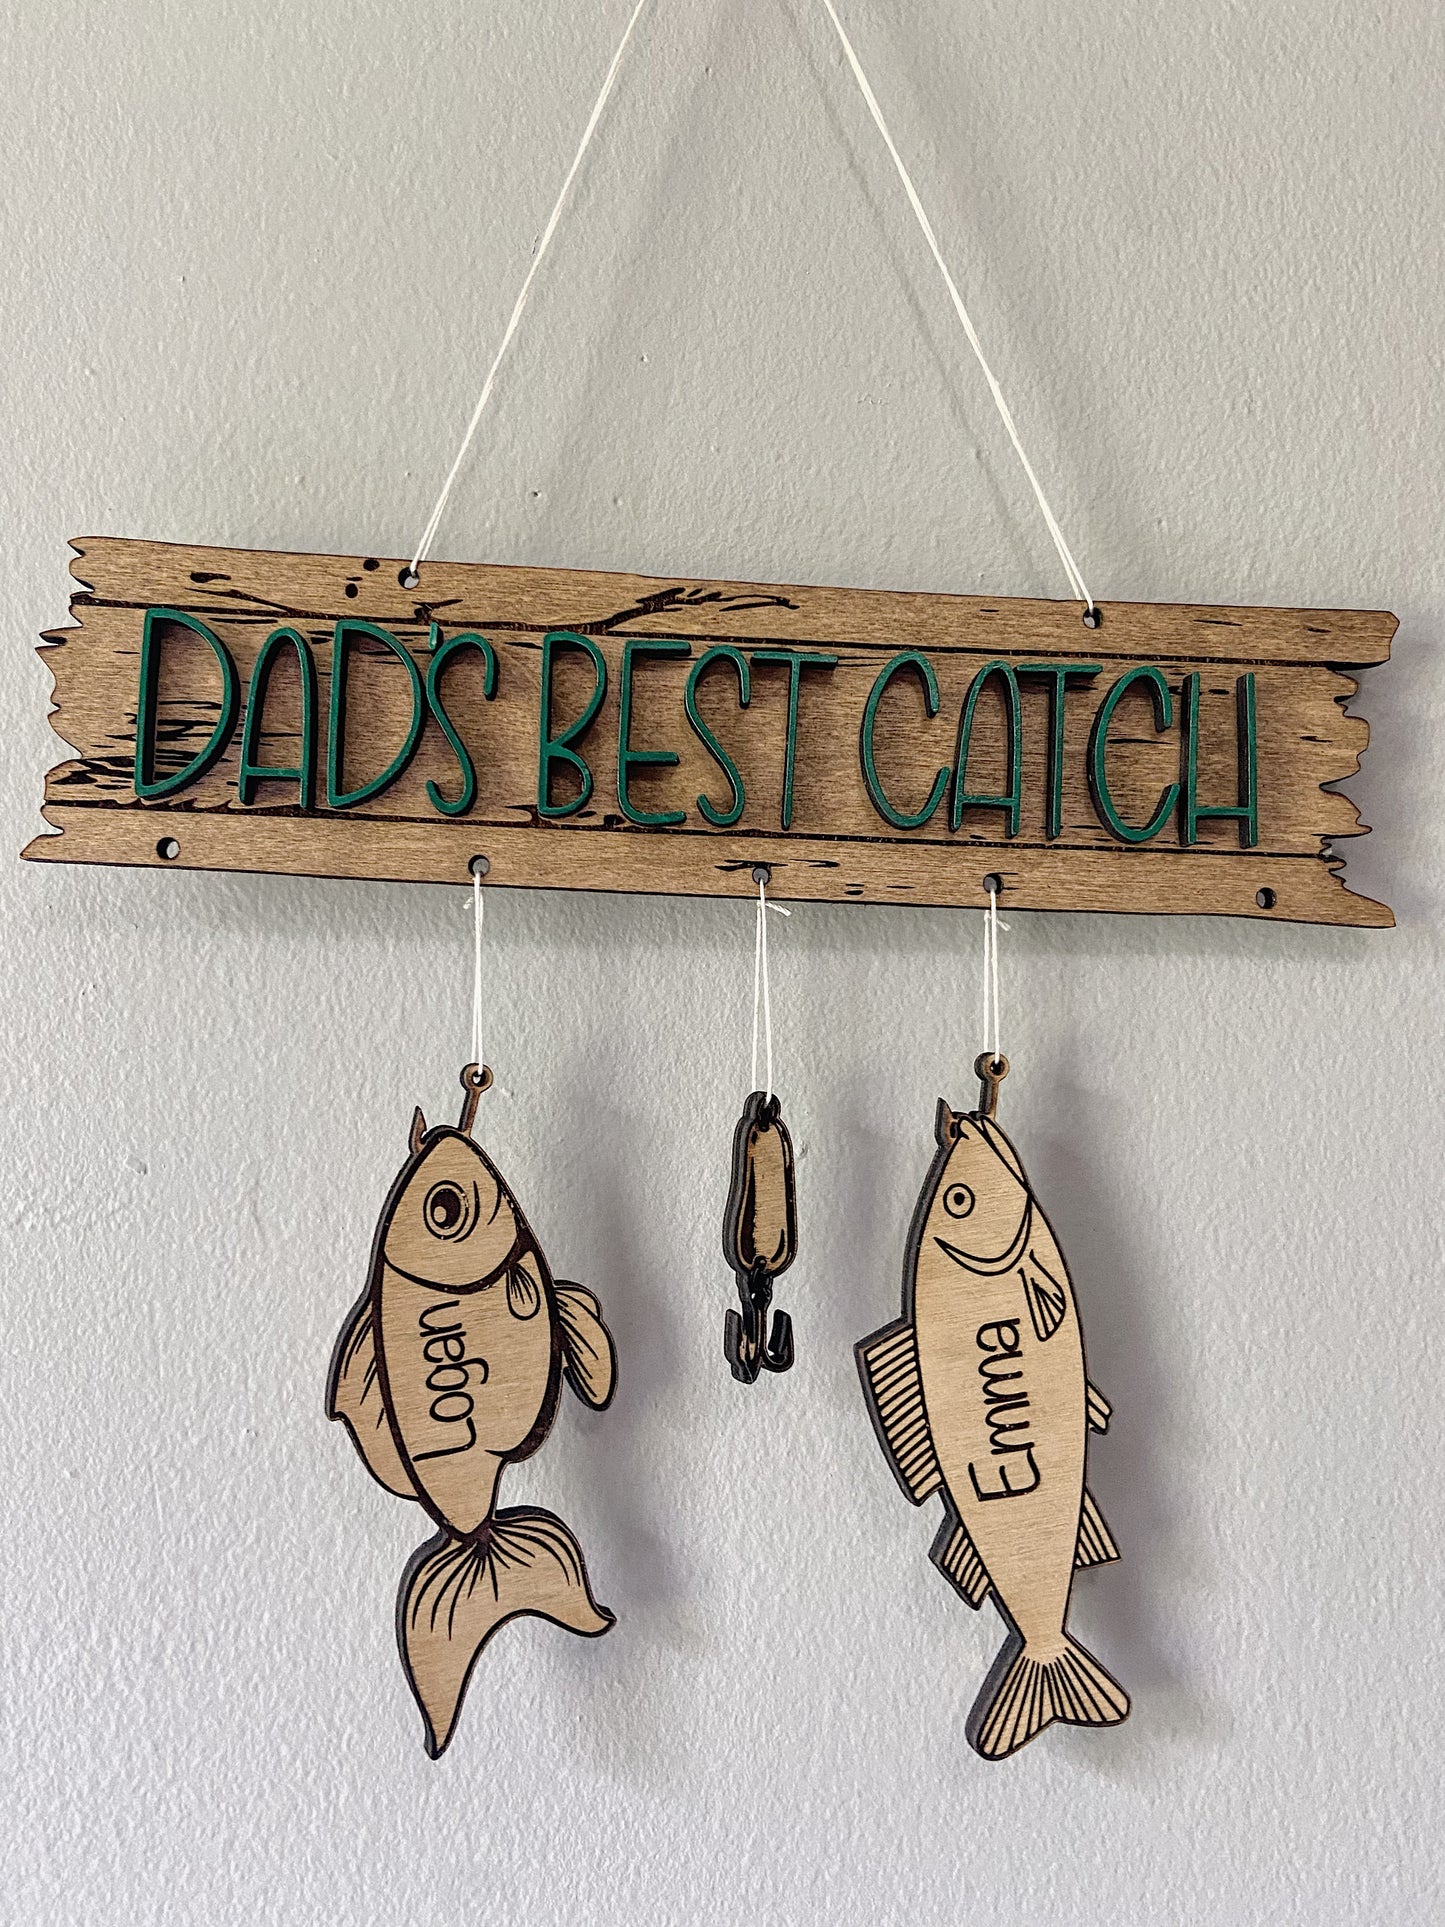 Dad's Best Catch - Fishing Themed Sign with Custom Names on Fish